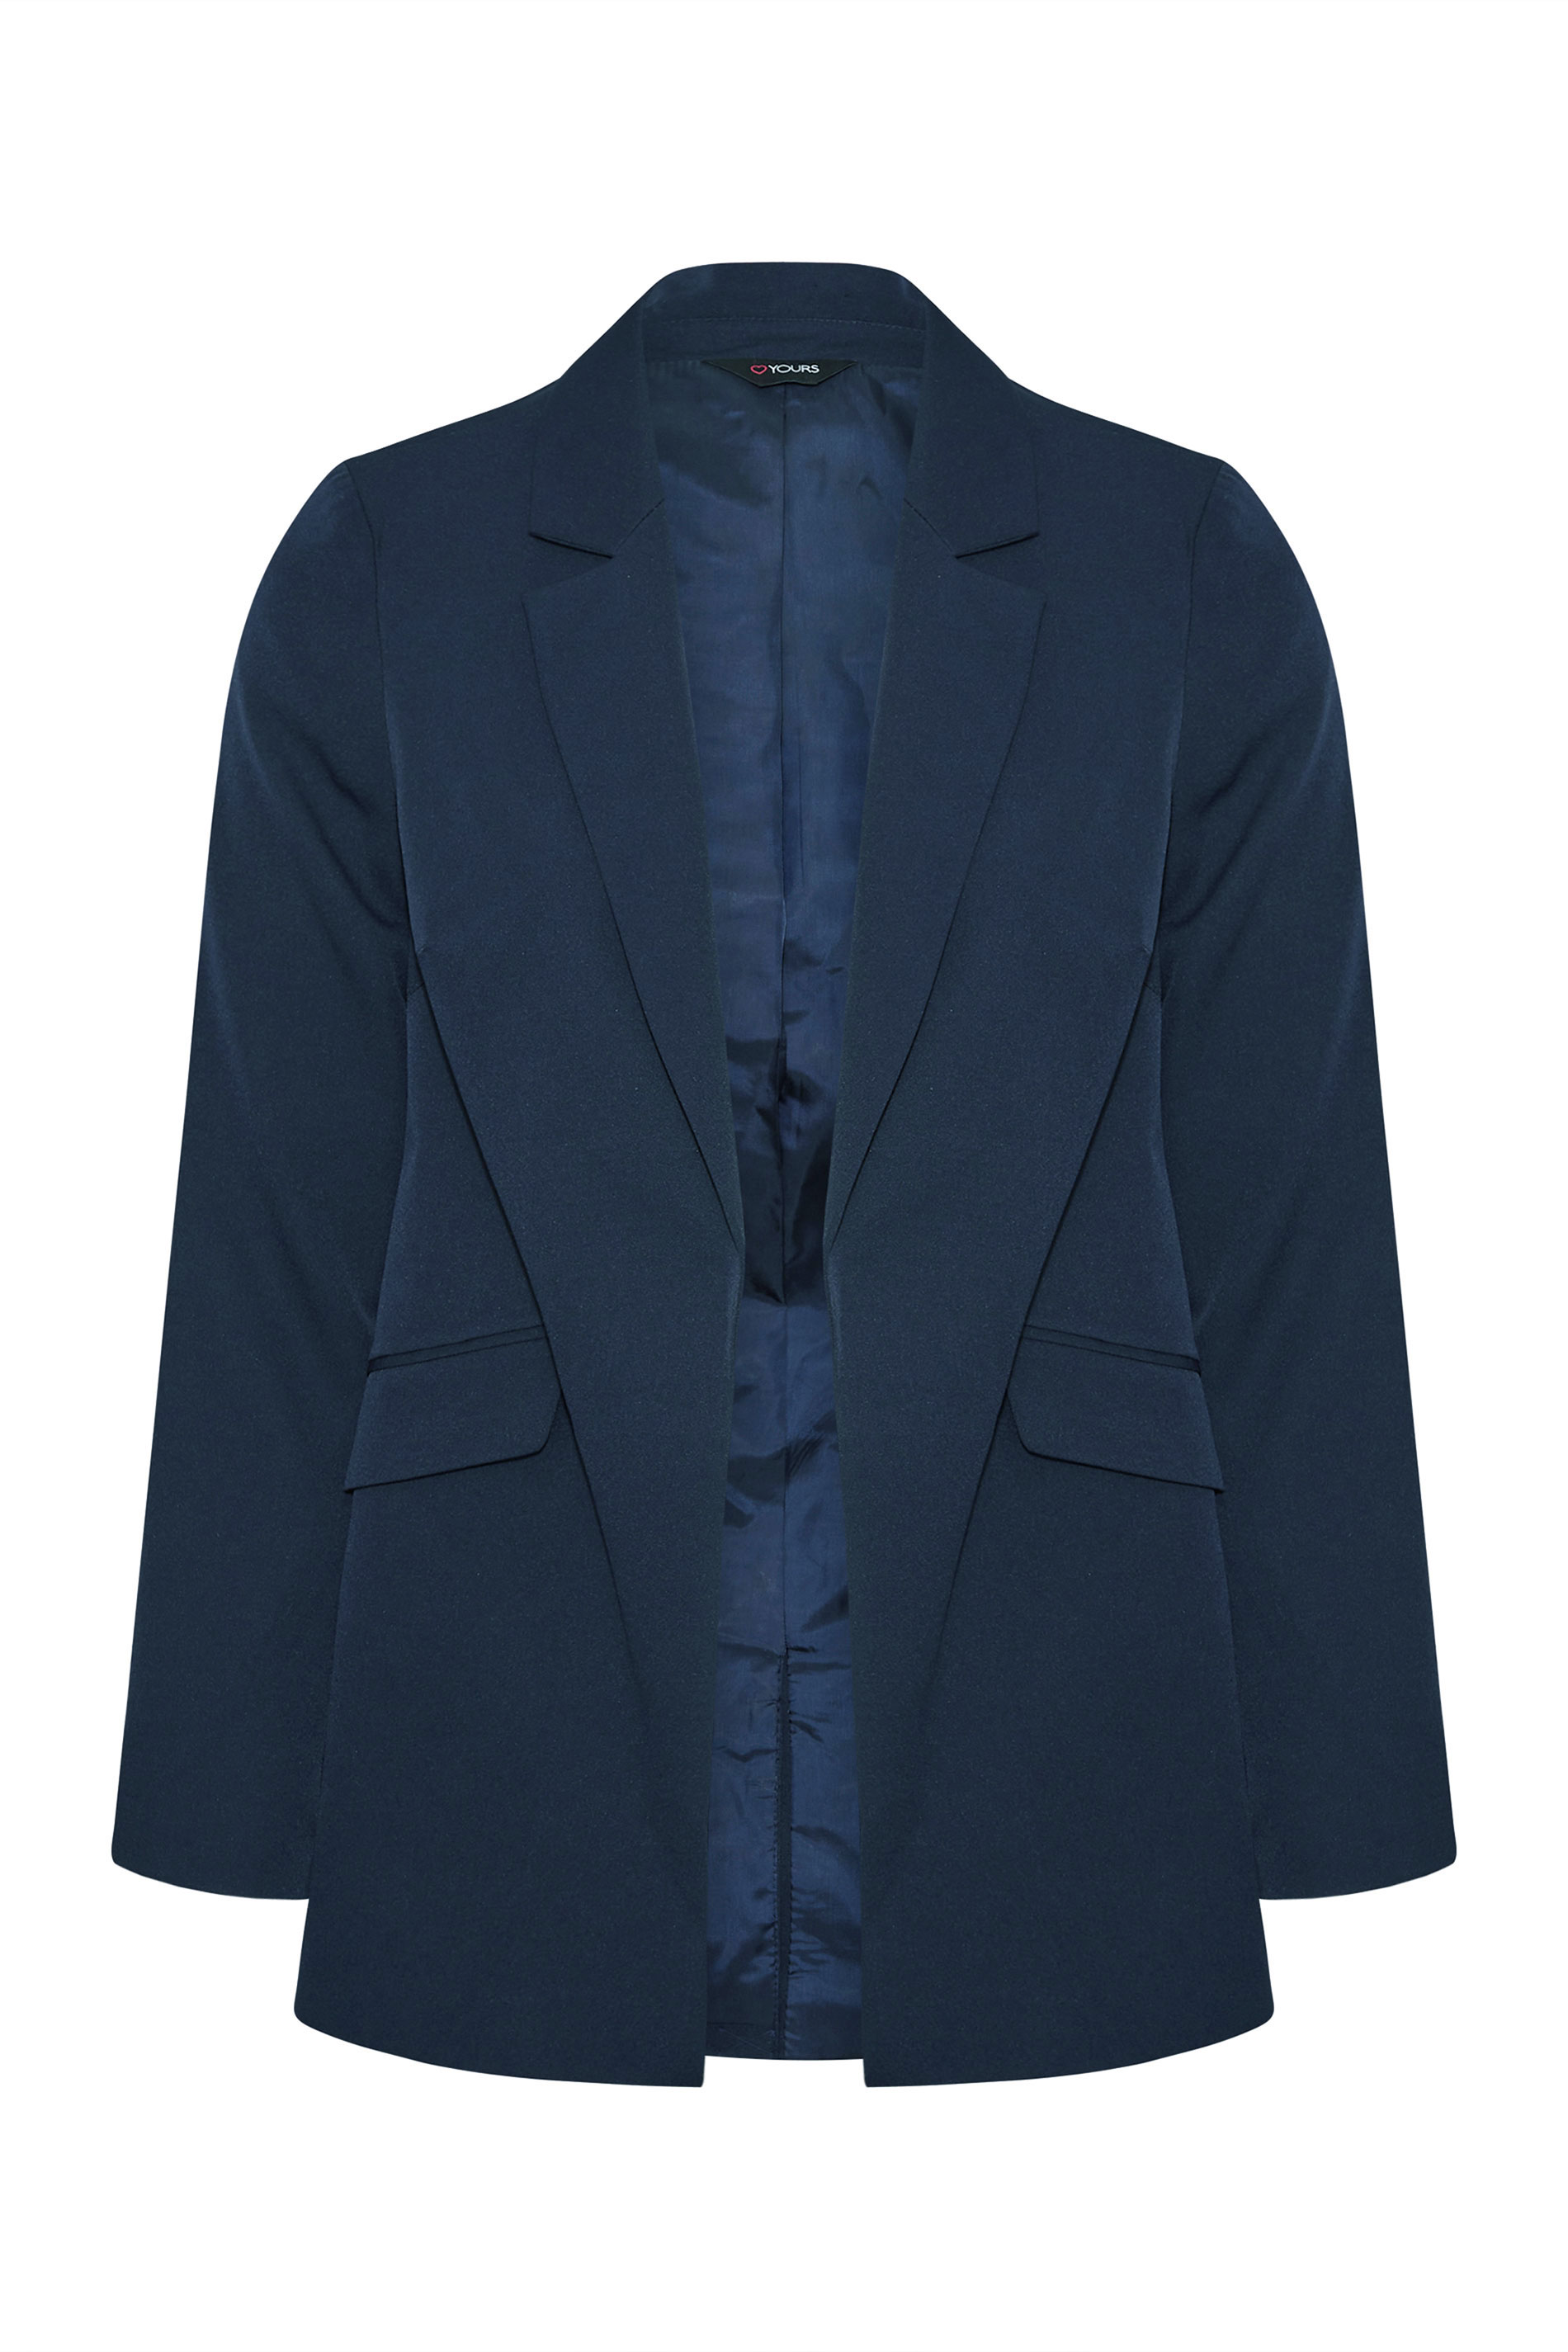 Plus Size Navy Blue Lined Blazer | Yours Clothing